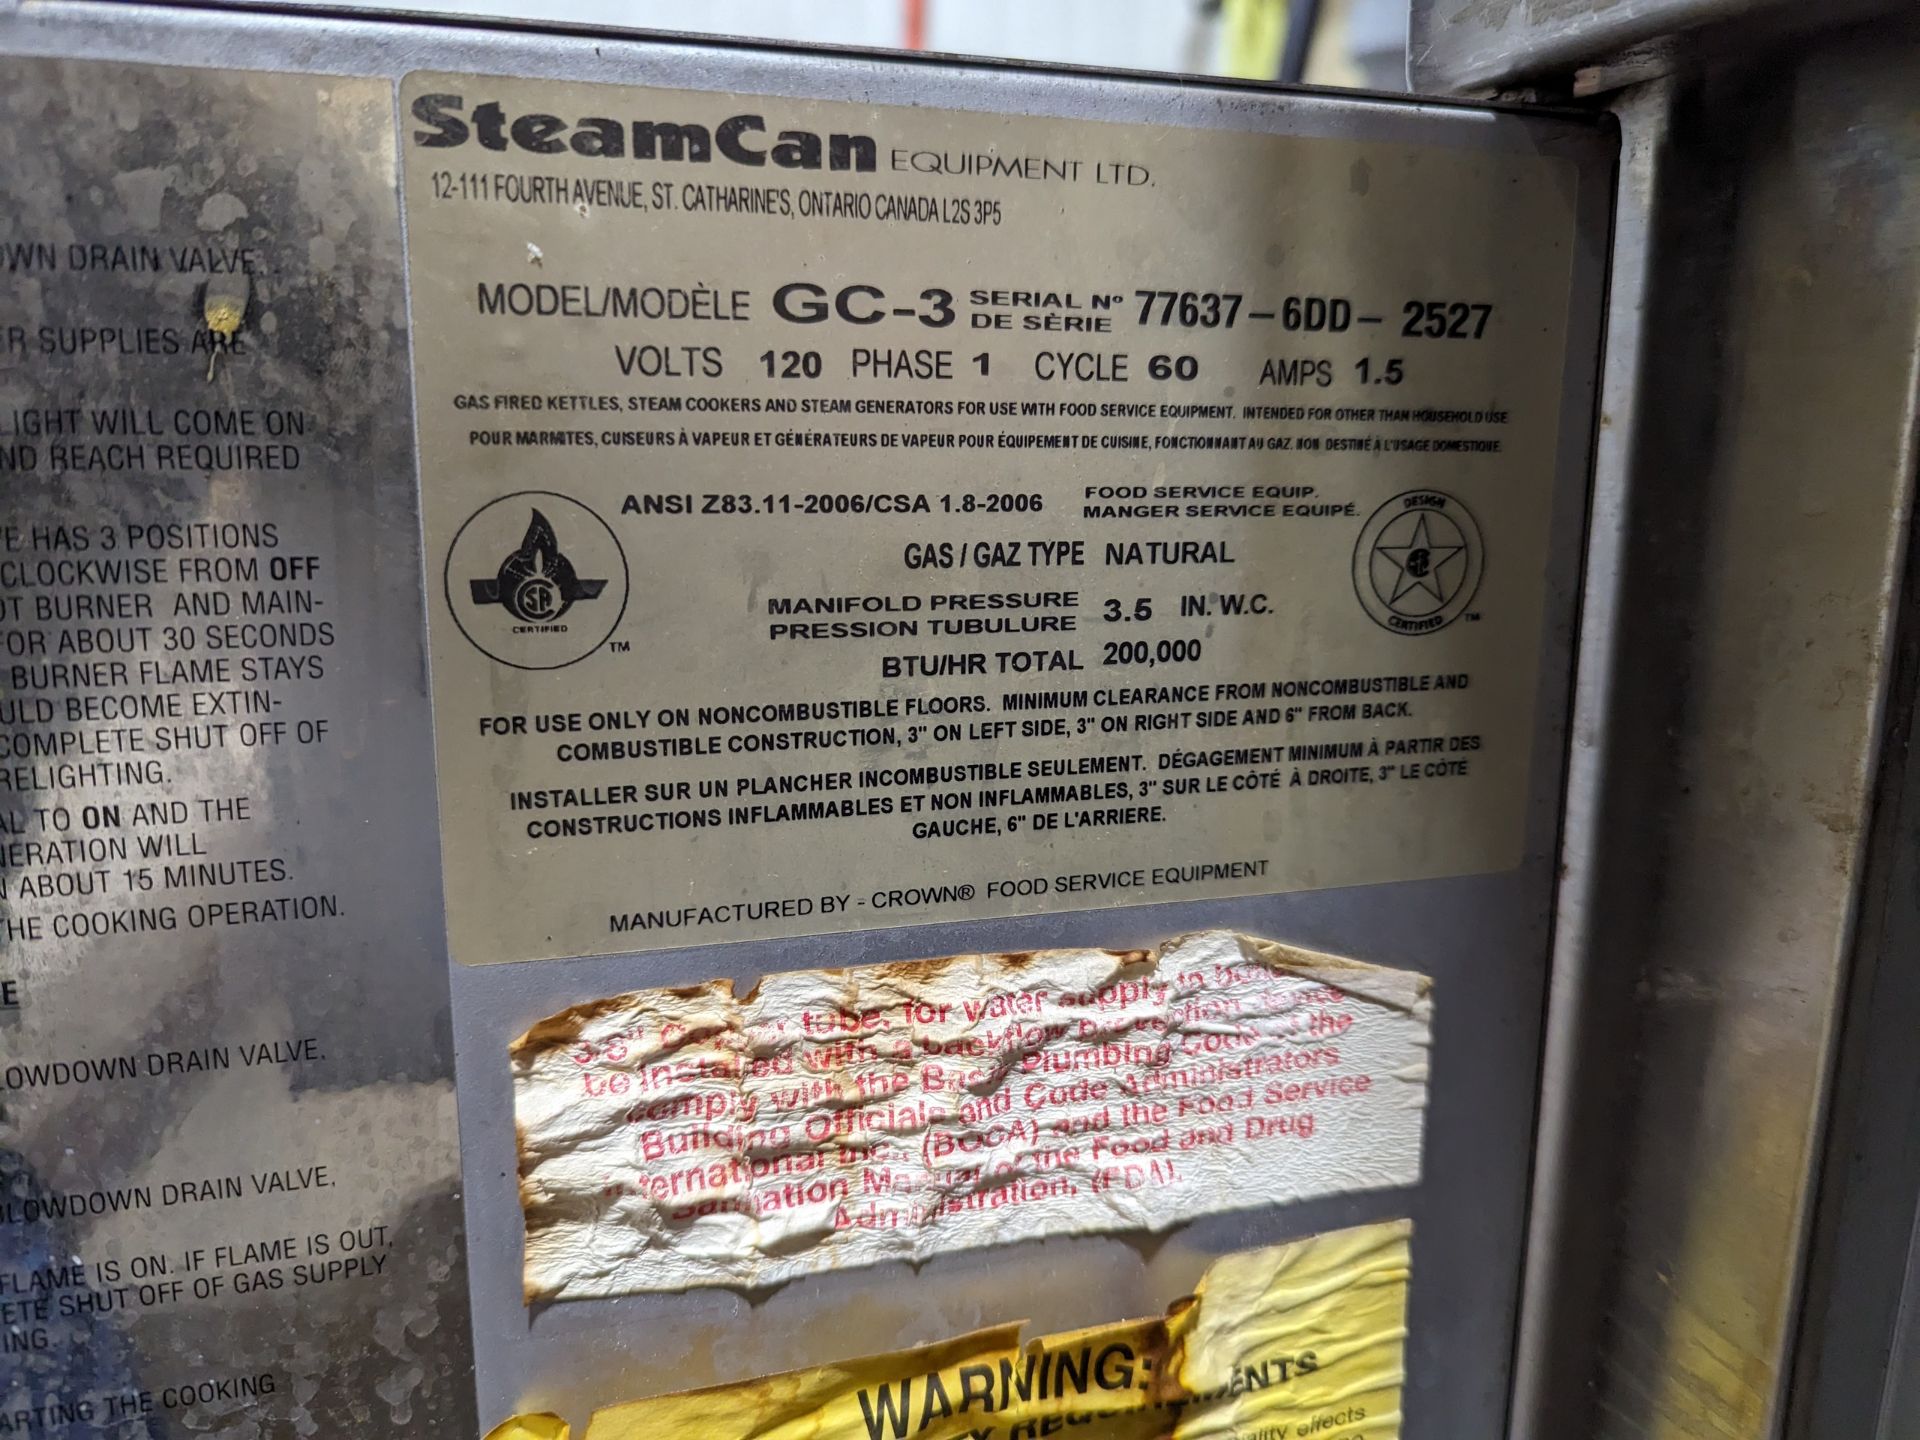 SteamCan GC-3 Pressure Steamer, Dimensions LxWxH 33x36x69, Rigging Price: $120 - Image 3 of 5